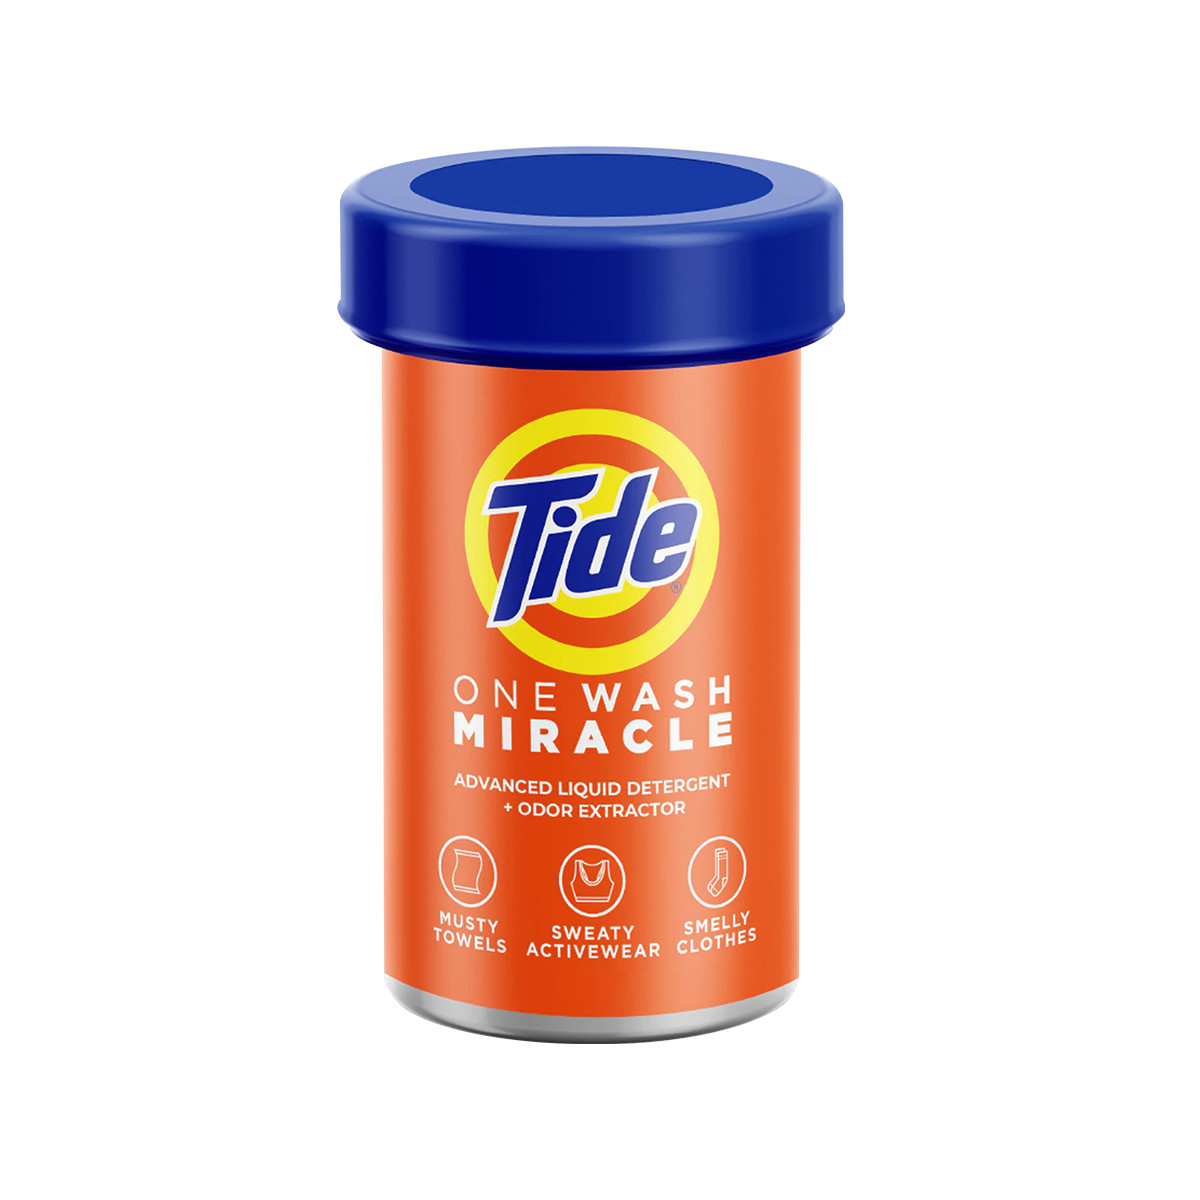 Tide One Wash Miracle - Powerful Deep-Cleaning Laundry Solution